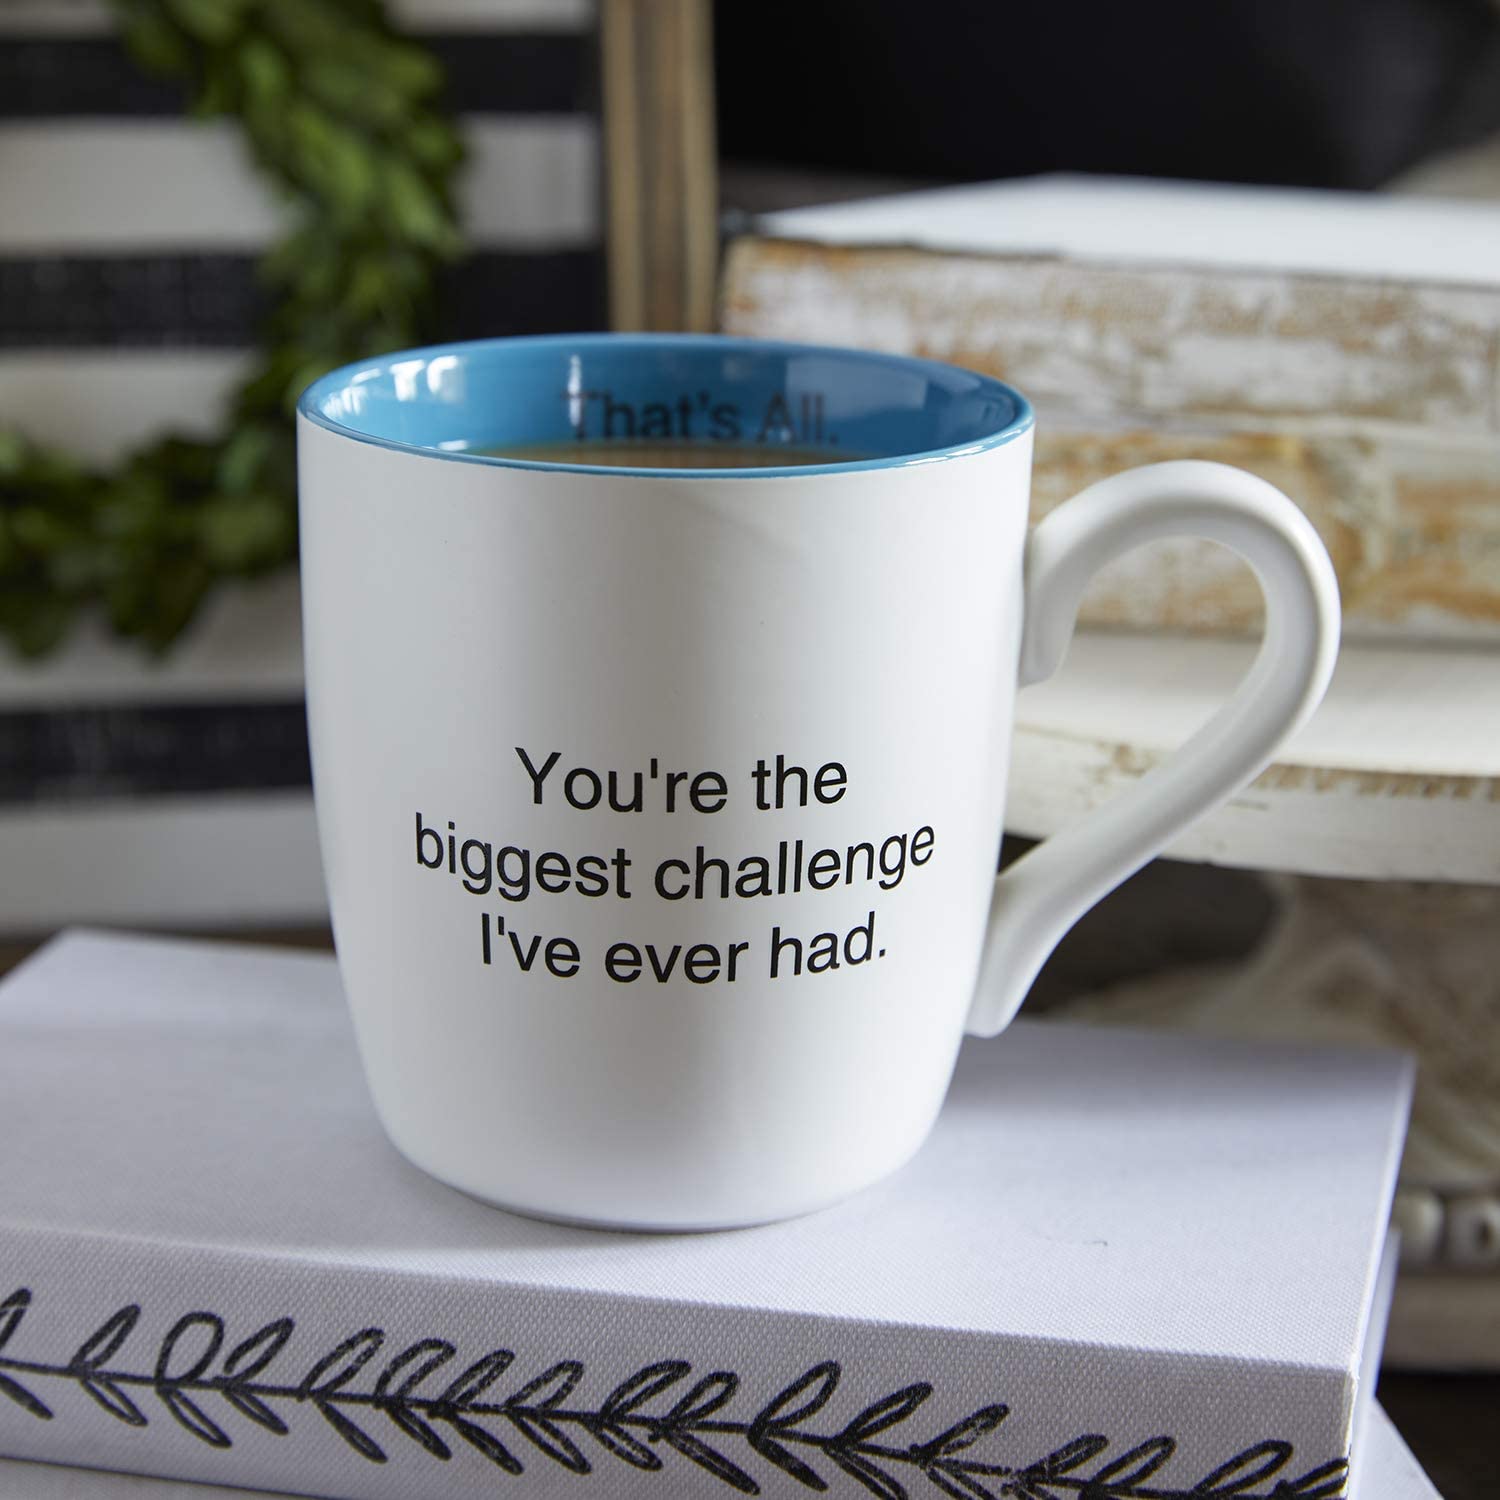 You're The Biggest Challenge I've Ever Had Ceramic Coffee Mug in Teal and White